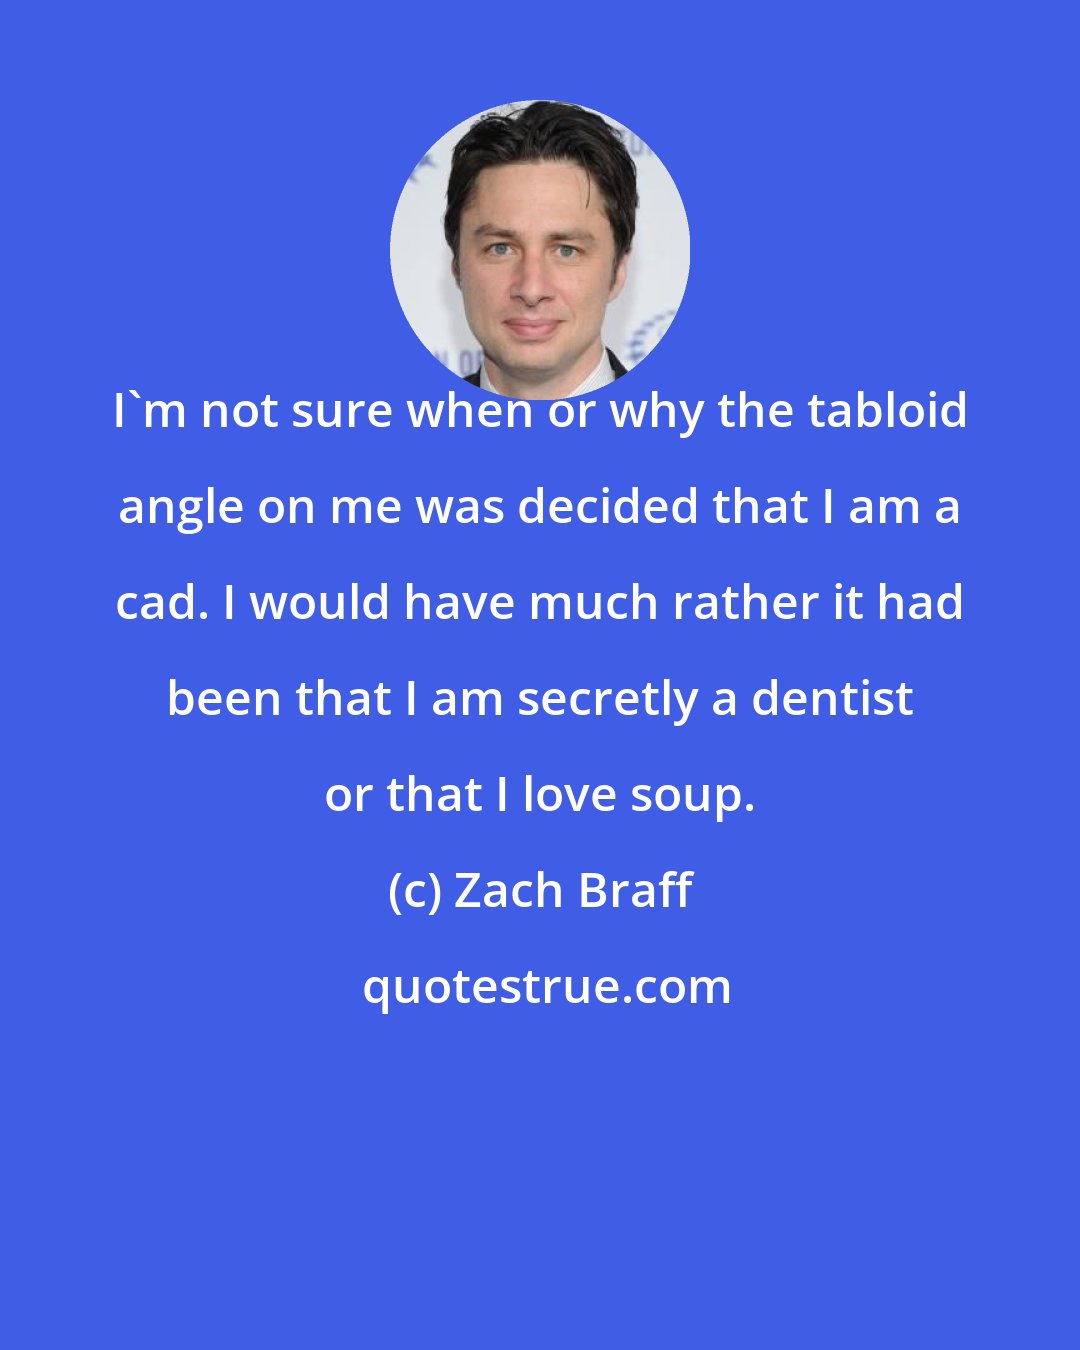 Zach Braff: I'm not sure when or why the tabloid angle on me was decided that I am a cad. I would have much rather it had been that I am secretly a dentist or that I love soup.